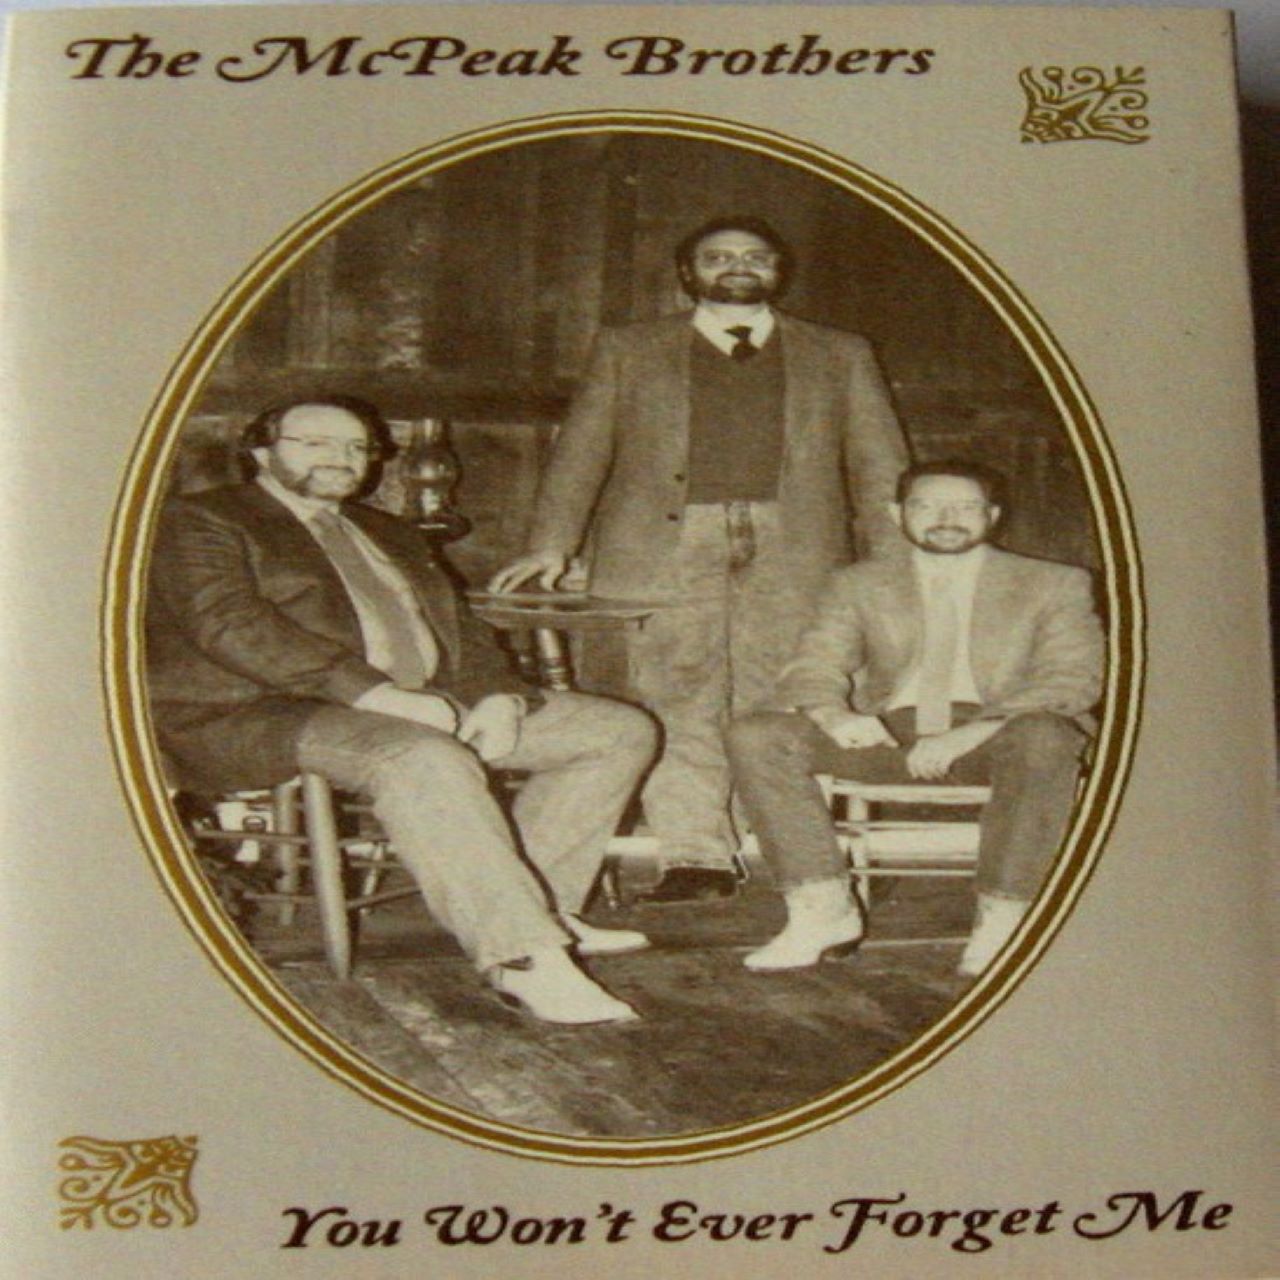 McPeak Brothers - You Won’t Ever Forget Me cover album